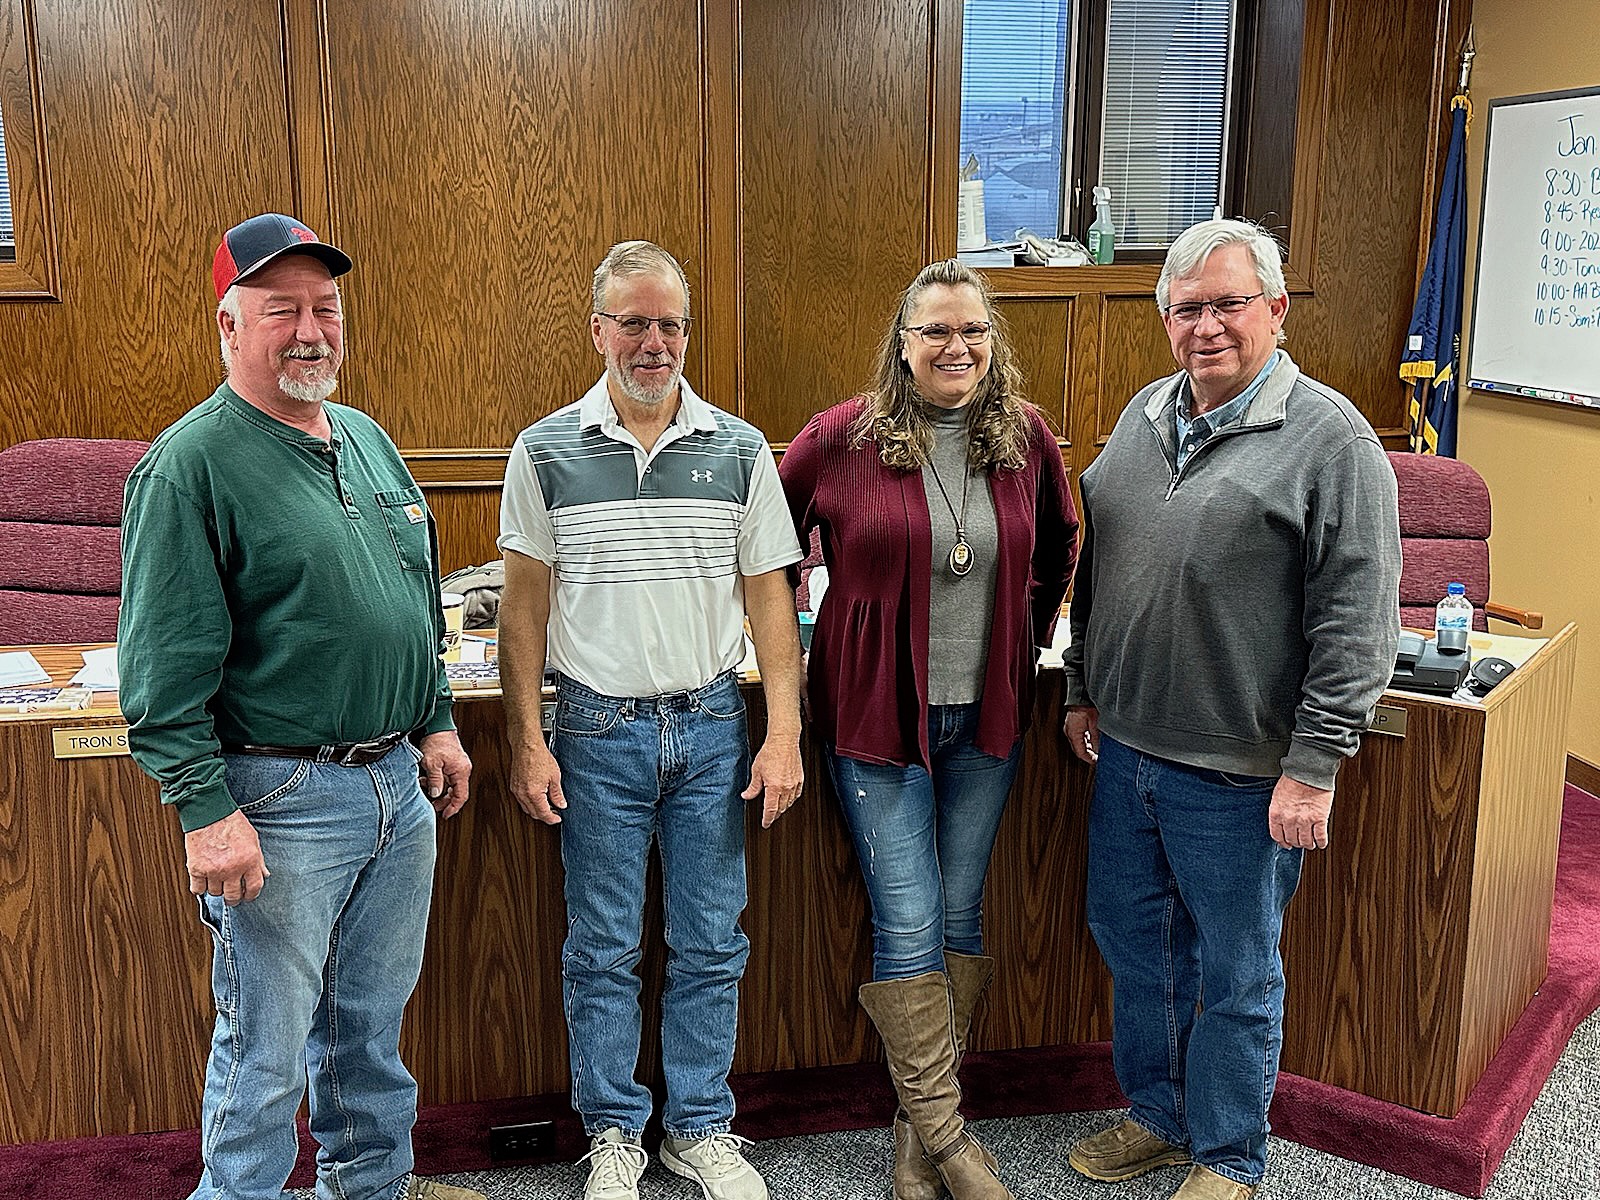 The Stevens County Employees that have ten years of service pictured left to right, Kyle 
Hittle, Pat Hall, Amy Jo Tharp and Tony Martin. Not pictured: 10 year: Bailey Esarey EMS/PT; 20 year: John Moser - EMS/PT and Duane Topliss - Sheriff Dept; and 30 year: Trina Young - Sheriff Dept.